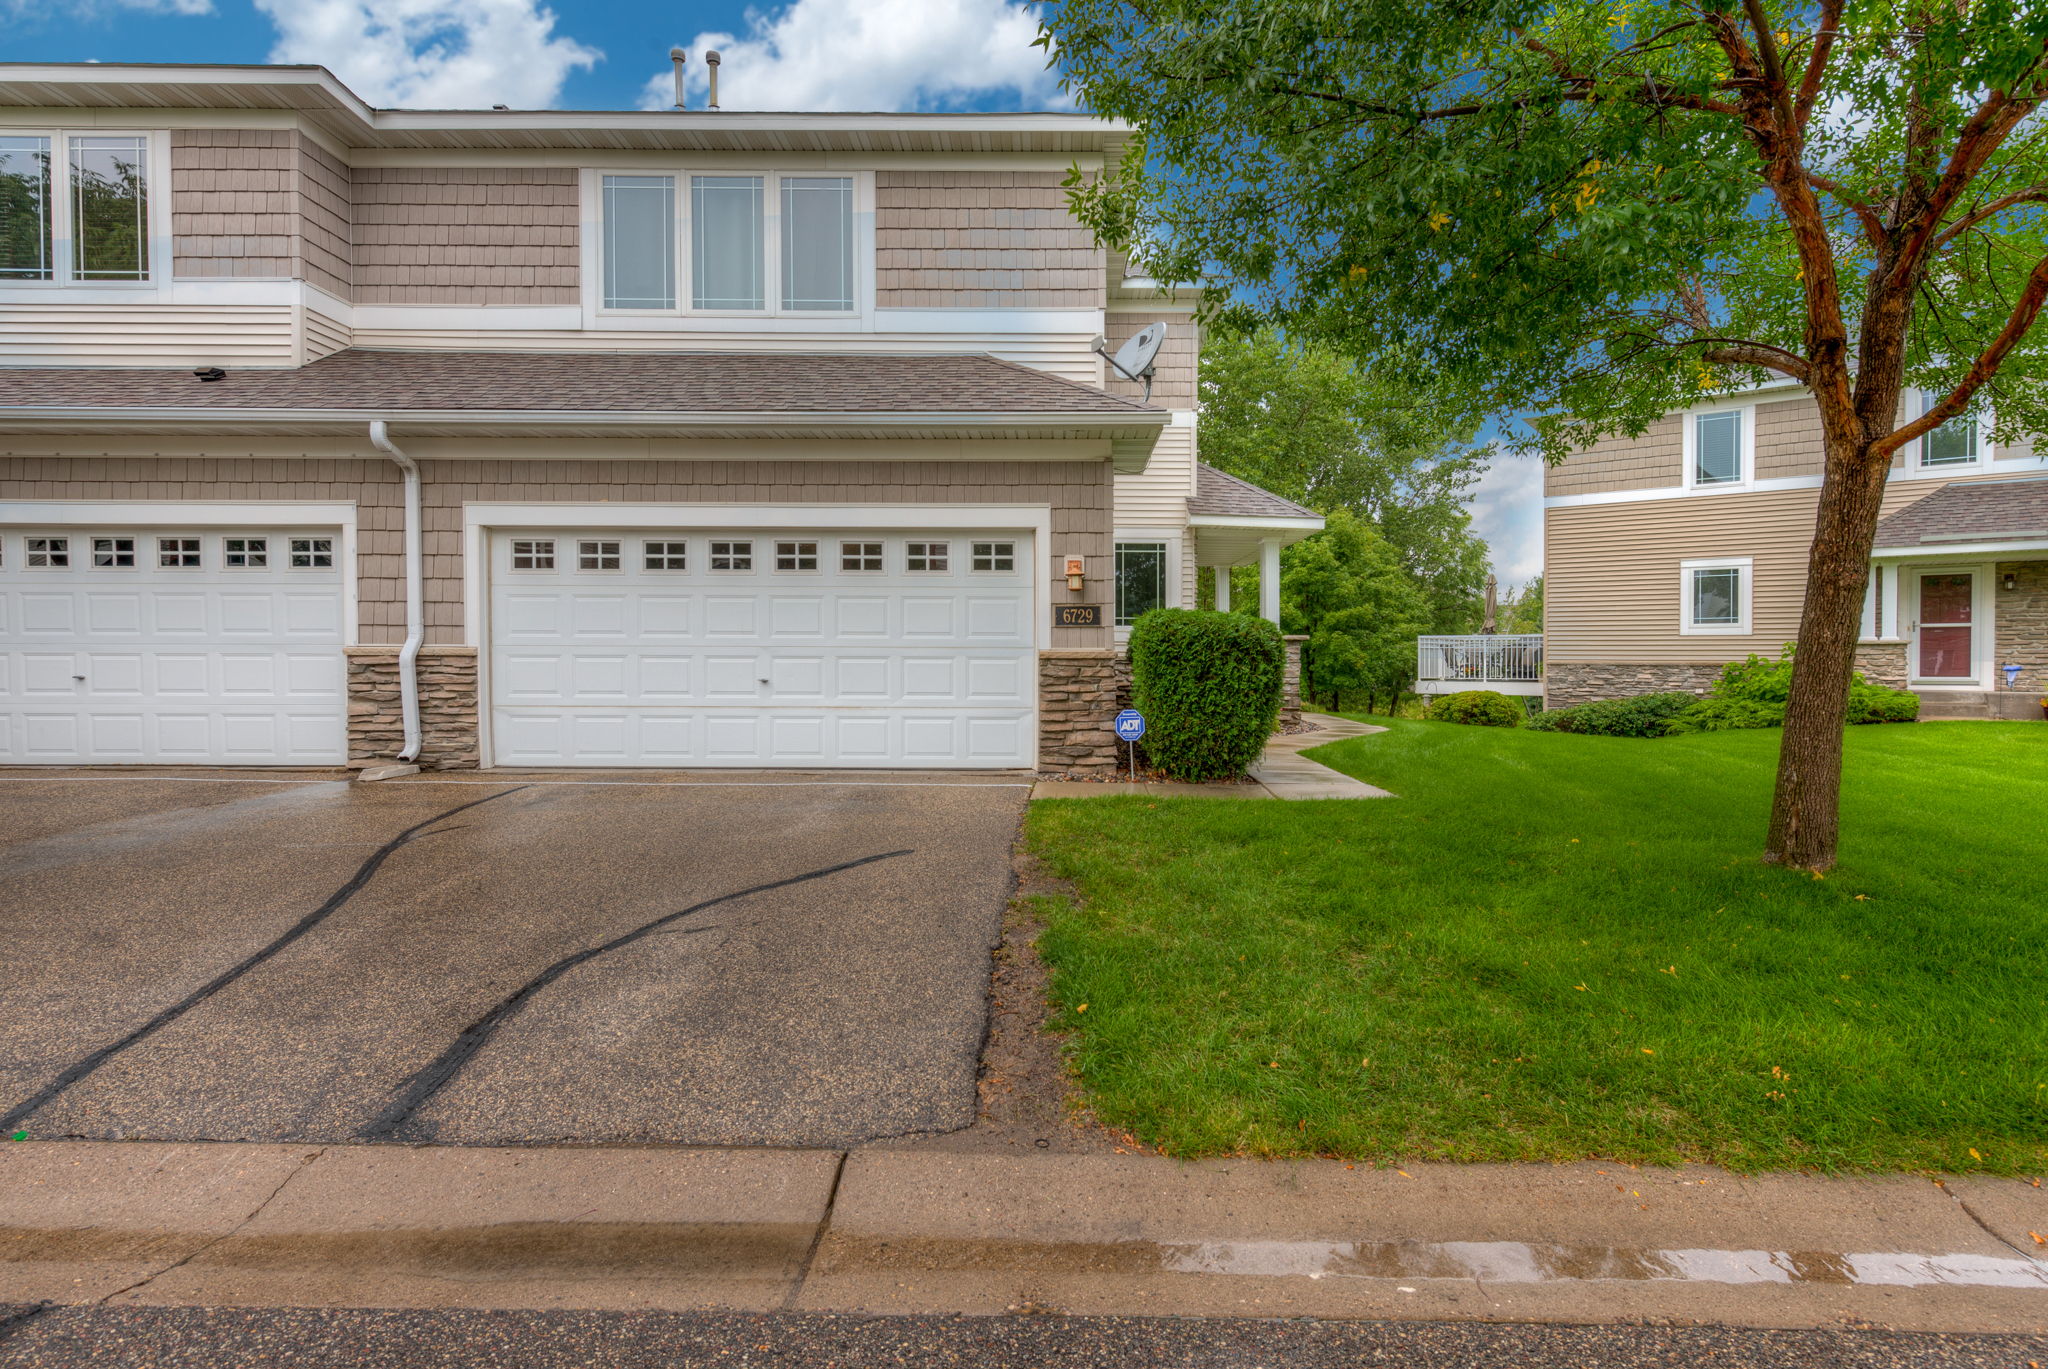  6729 158th Street West, Apple Valley, MN 55124, US